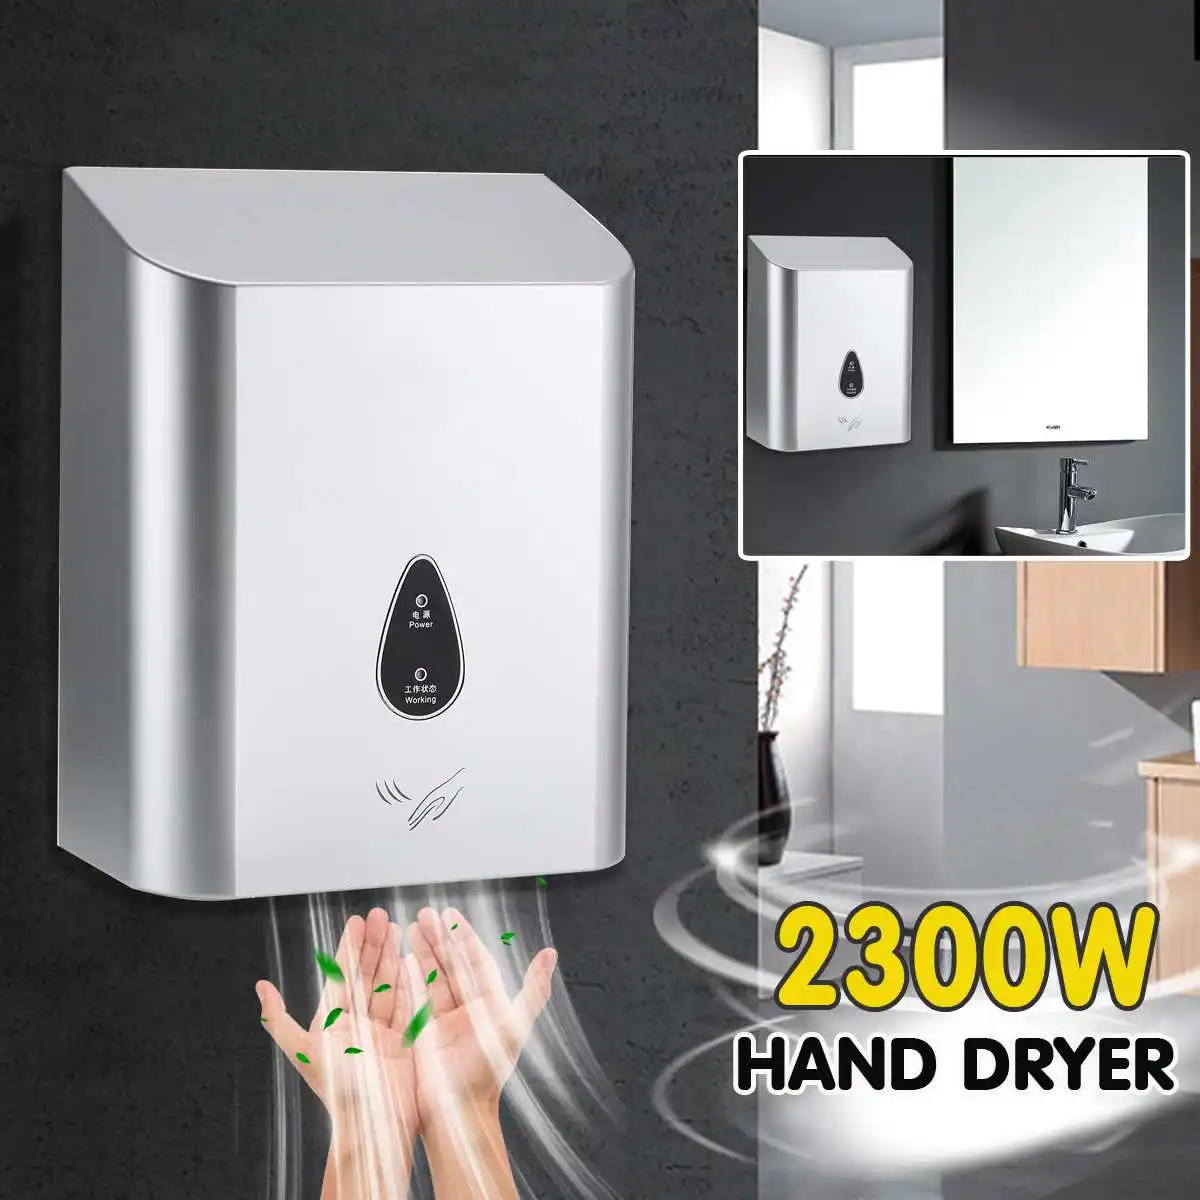 

2300W 220V Full Automatic Hand-drying Device High Speed Electric Hand Dryer Infrared Sensor Bathroom Hot Air Wind Blower